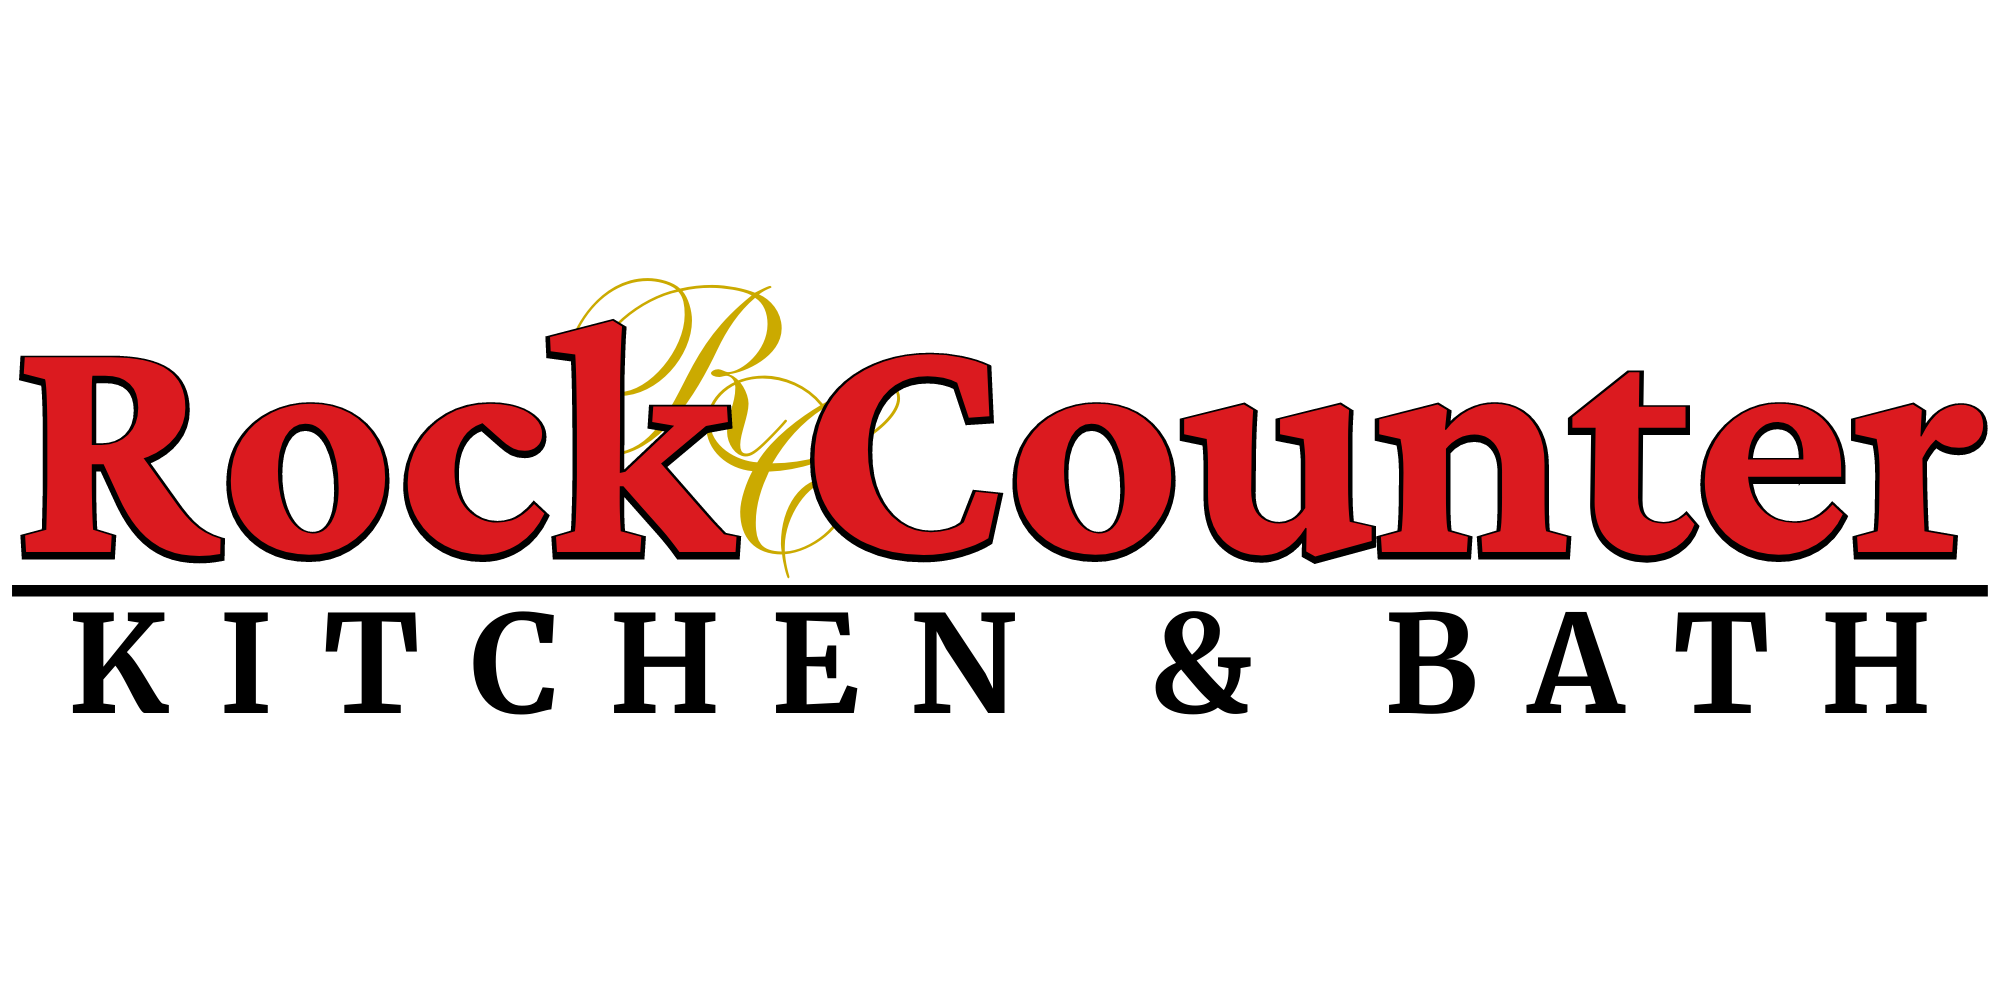 Rock Counter Kitchen & Bath | Quality Cabinets and Countertops at Affordable Prices